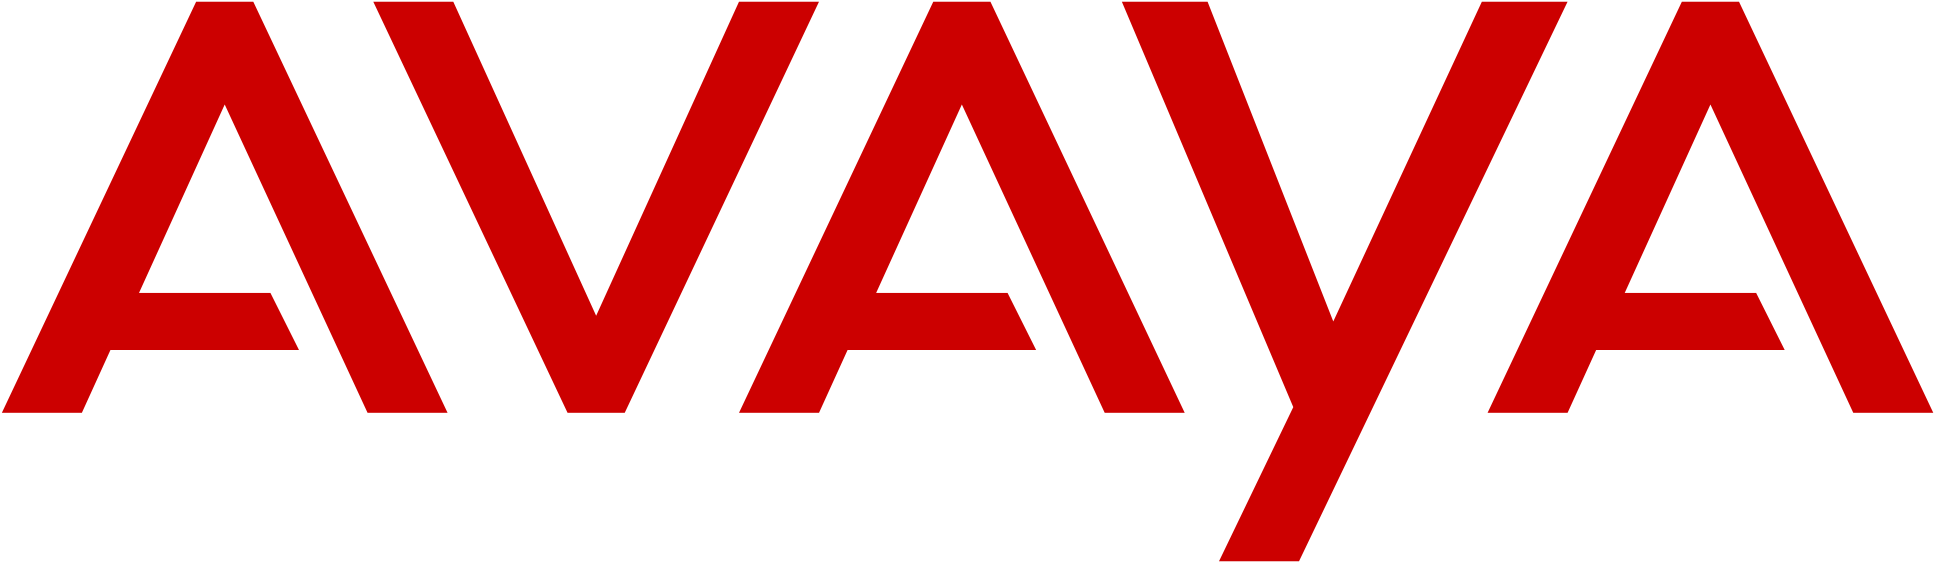 Click On The Icons To Take You To Vendor Pages - Avaya Logo (2000x571)